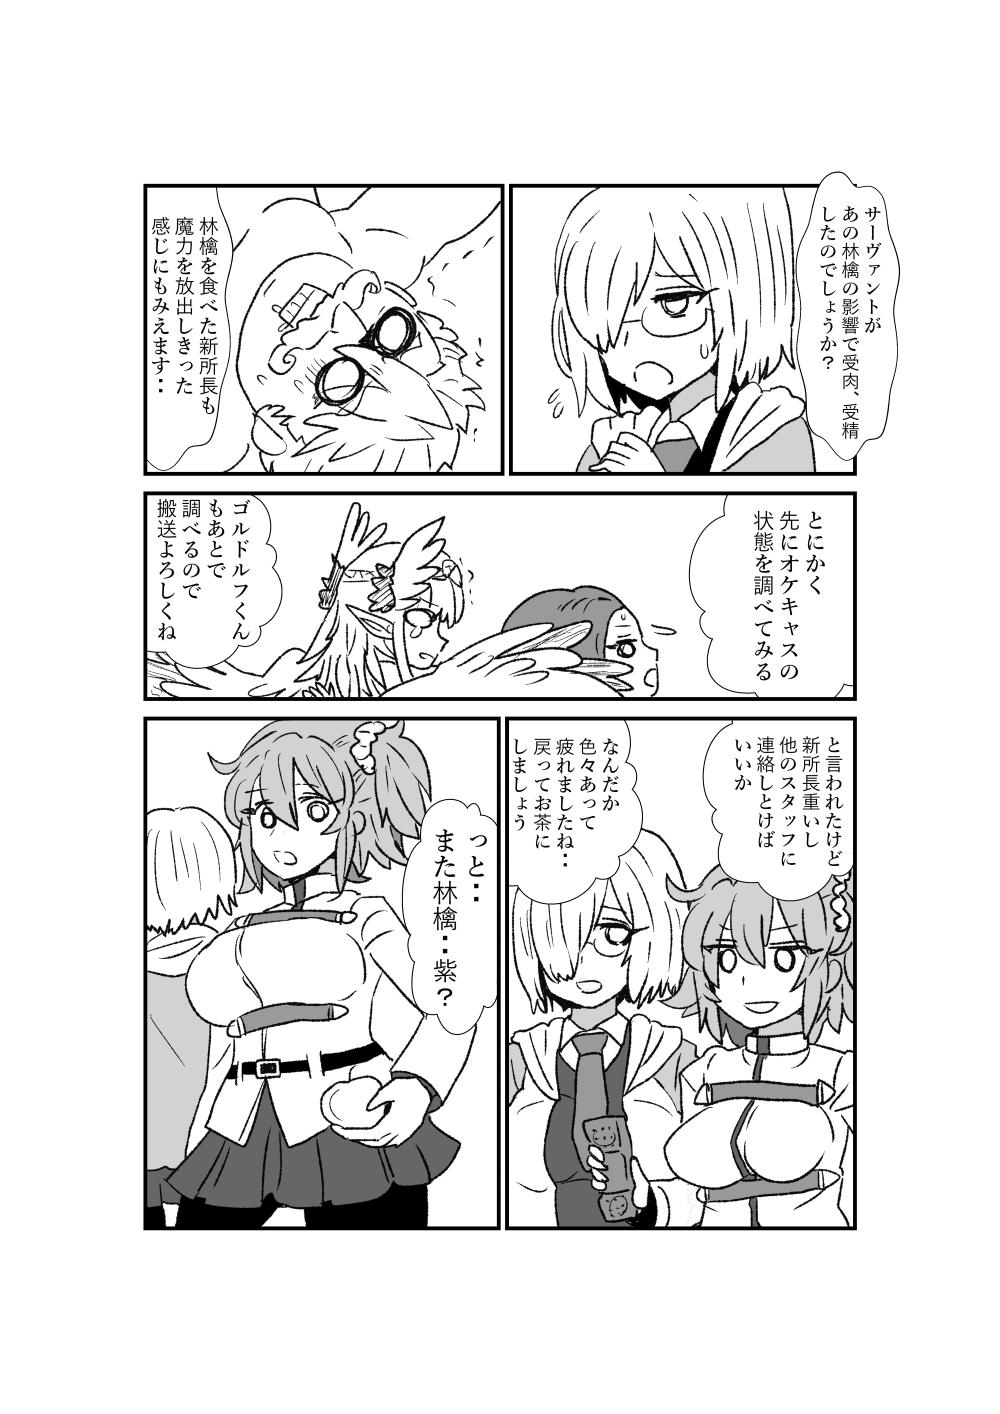 Vecina FPO~桃色林檎の種付け周回～ - Fate grand order Fucking - Page 9